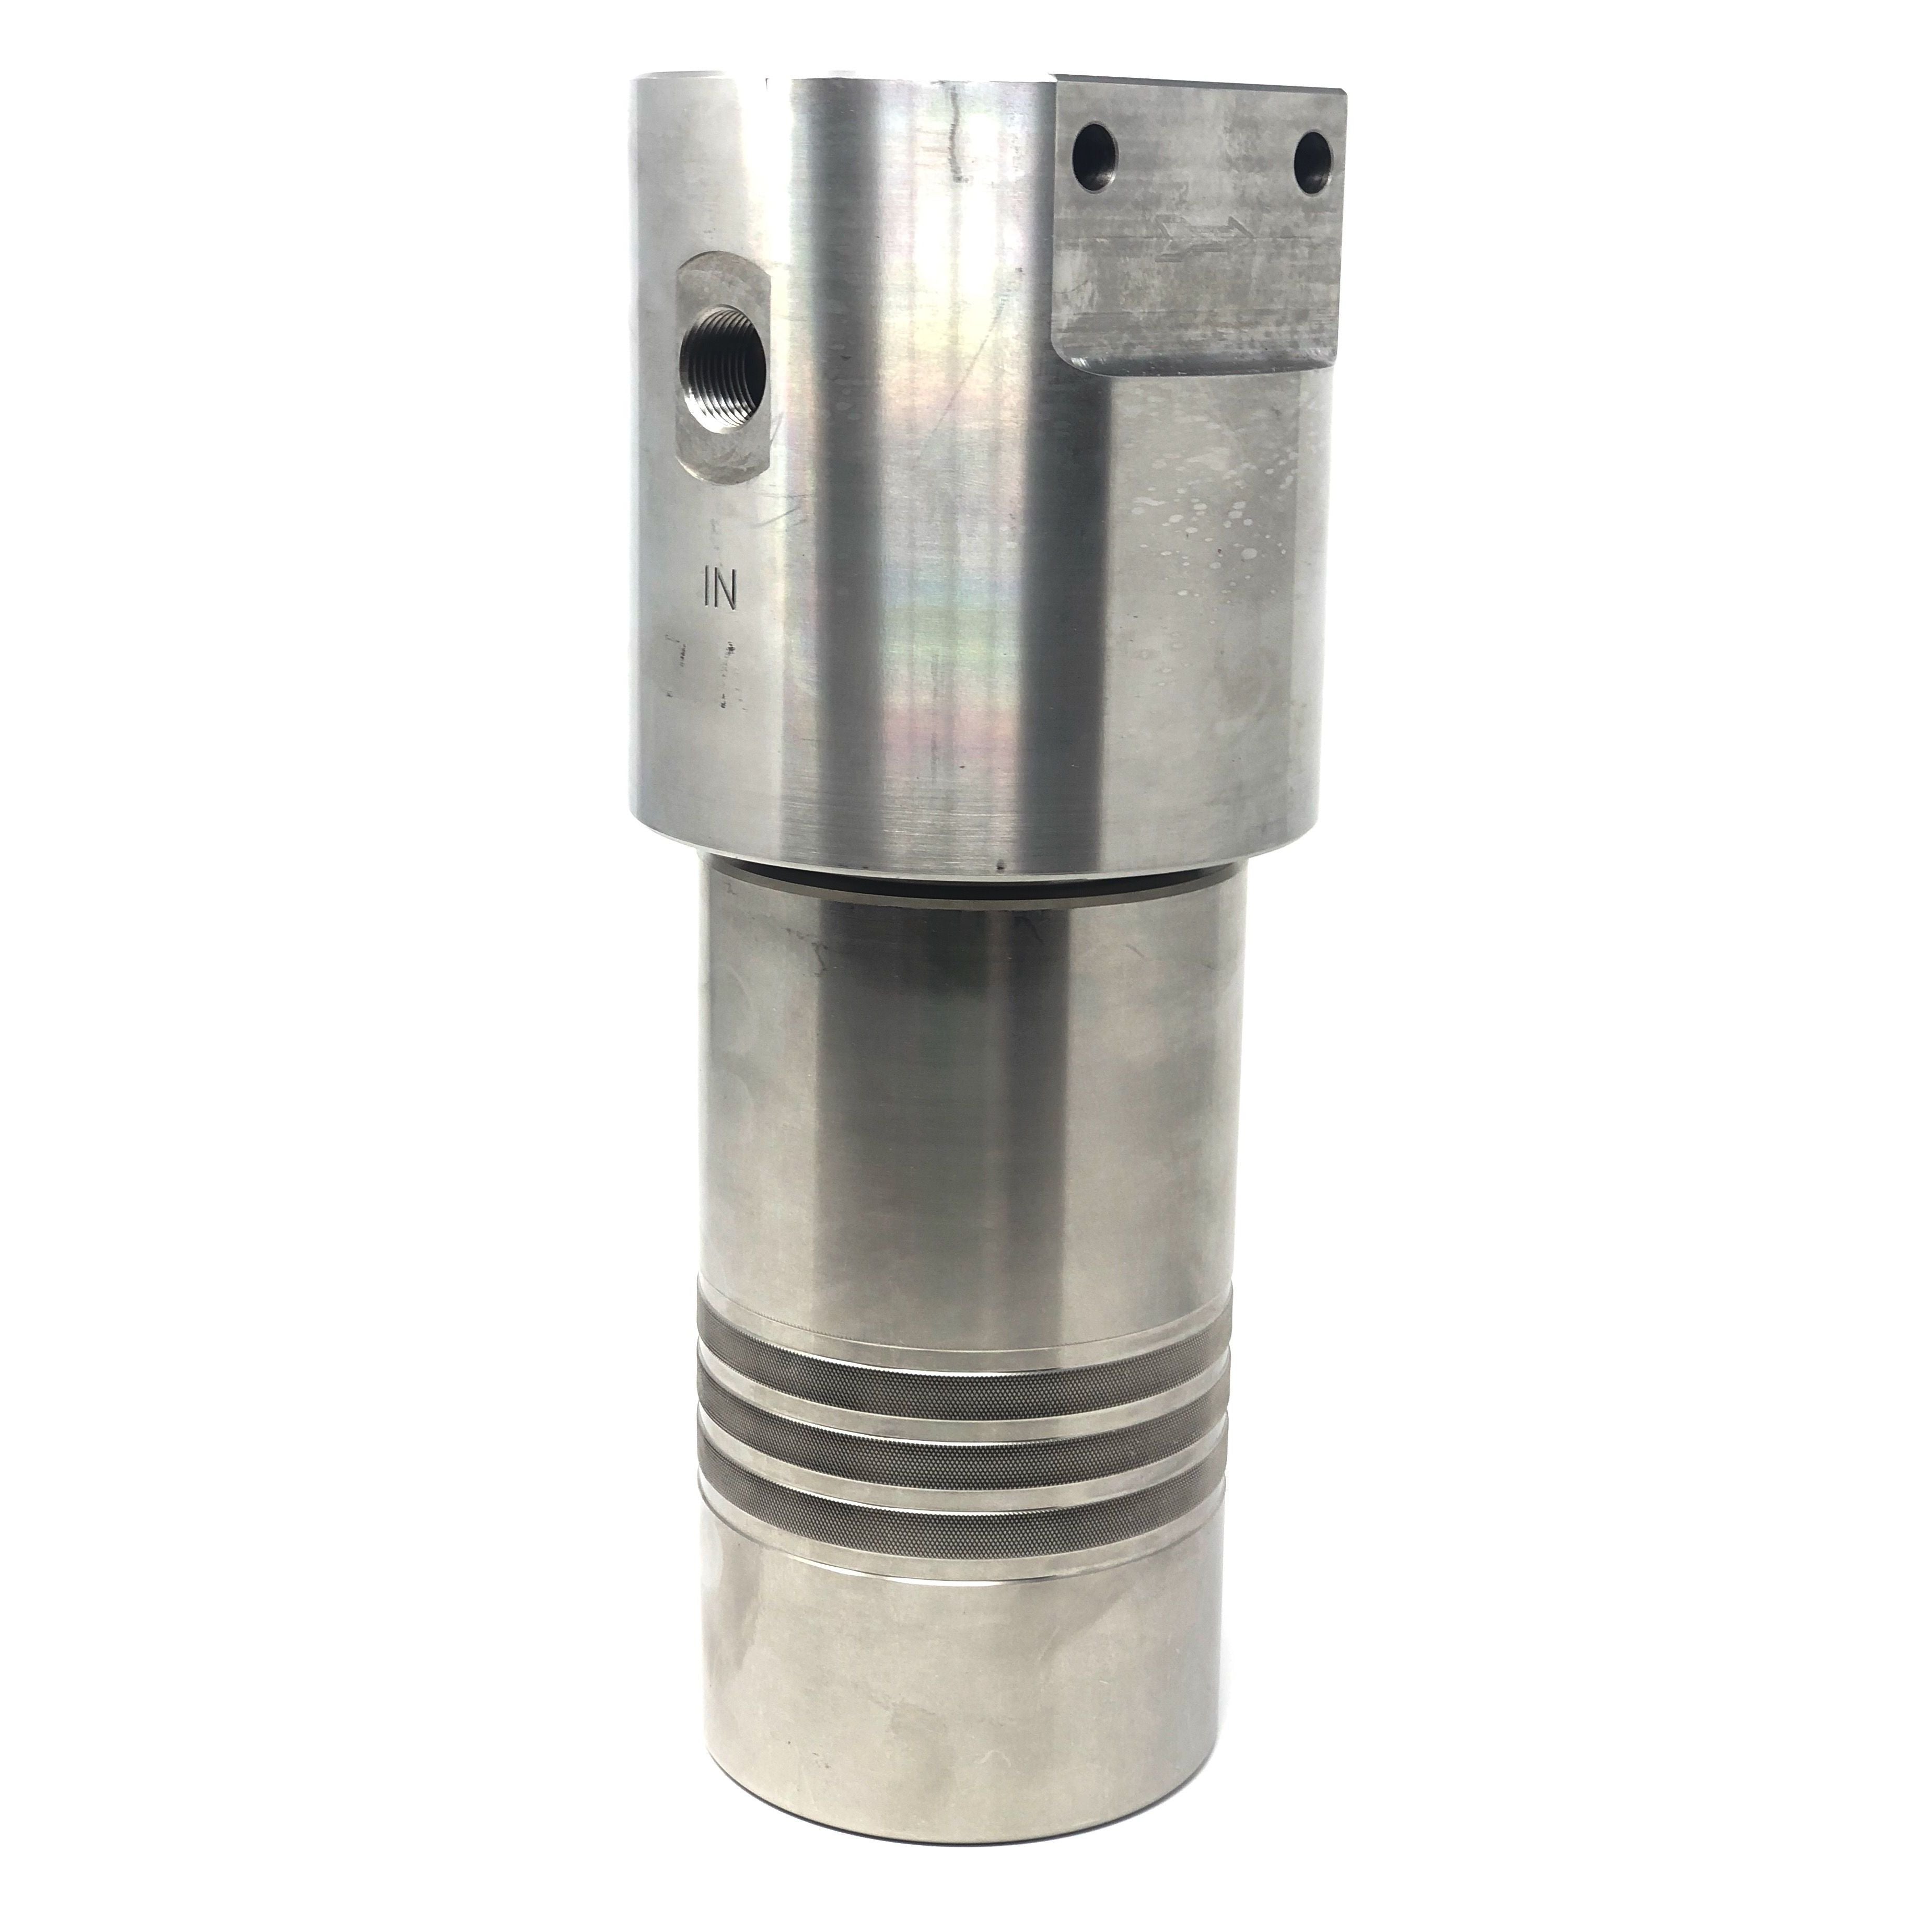 52S-2412N-40SEN : Chase Ultra High Pressure Inline Filter, 10000psi, 3/4" NPT, 40 Micron, With Visual Indicator, No Bypass